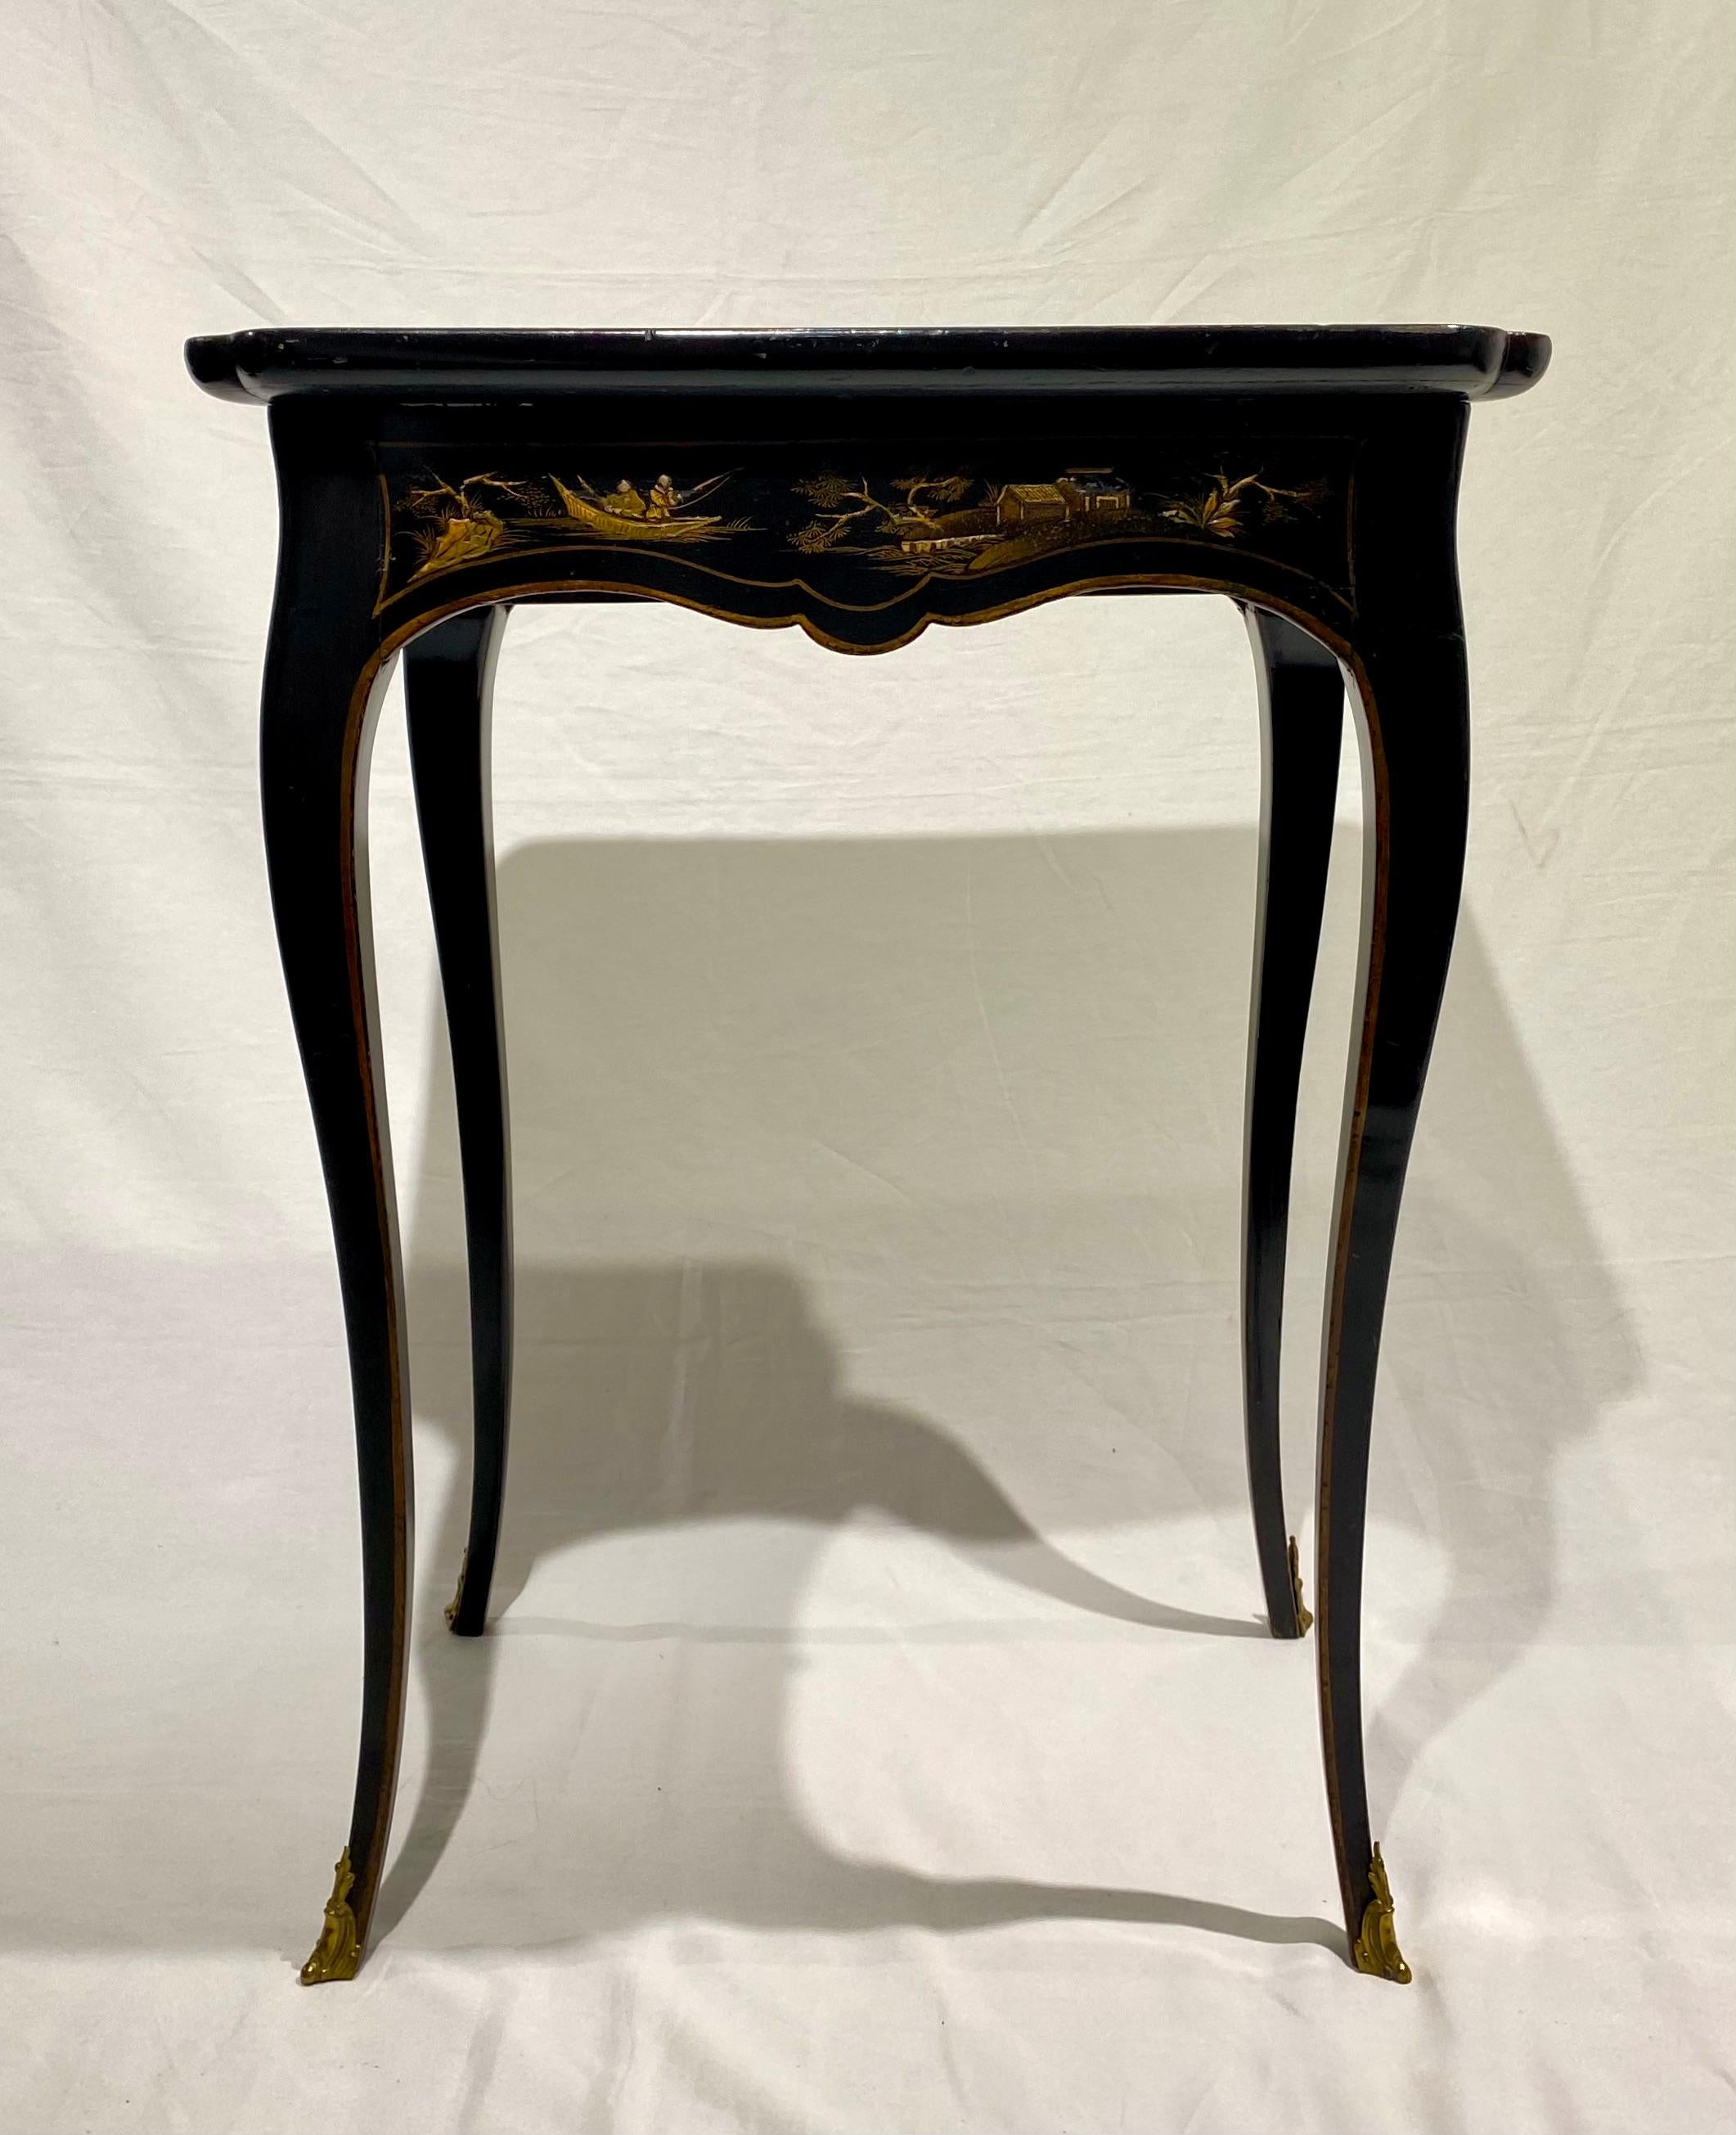 A Louis XV black and gilt Japanned occasional table, mid-18th century, with later restorations to the top. The dished tray (cabaret) adorned with raised, classic representations of fishing boats, fishermen, checker players and pagodas depicted in a